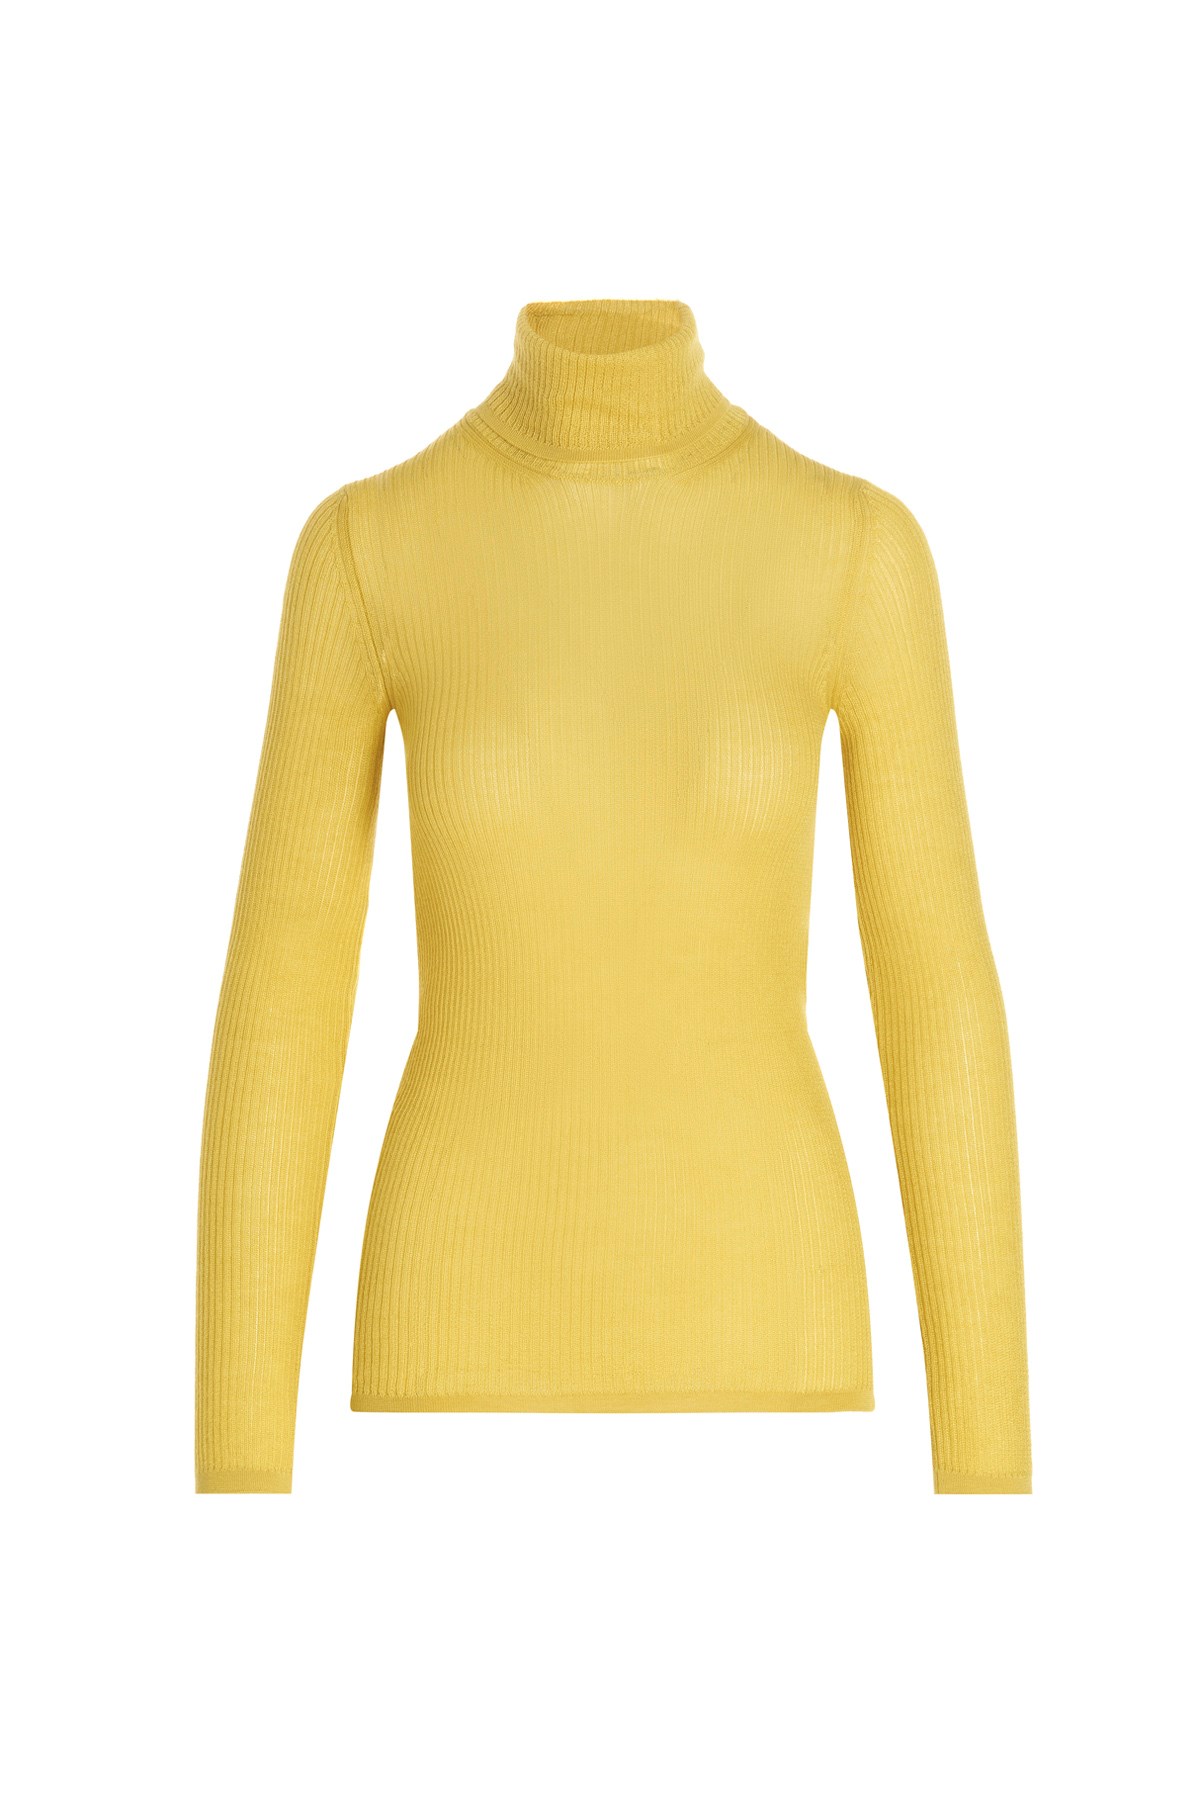 TOM FORD Ribbed Turtleneck Sweater